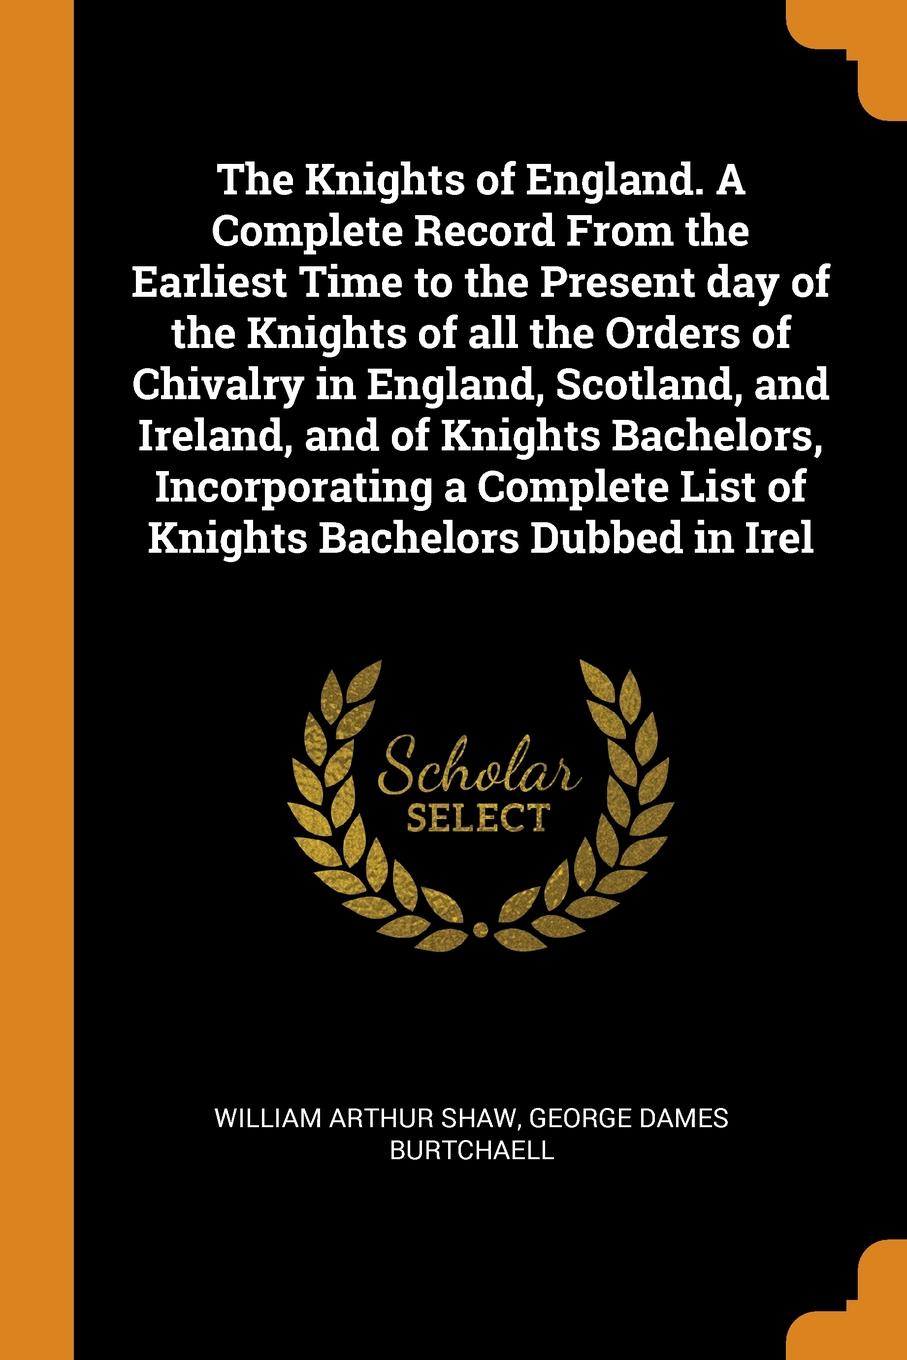 The Knights of England. A Complete Record From the Earliest Time to the Present day of the Knights of all the Orders of Chivalry in England, Scotland, and Ireland, and of Knights Bachelors, Incorporating a Complete List of Knights Bachelors Dubbed...